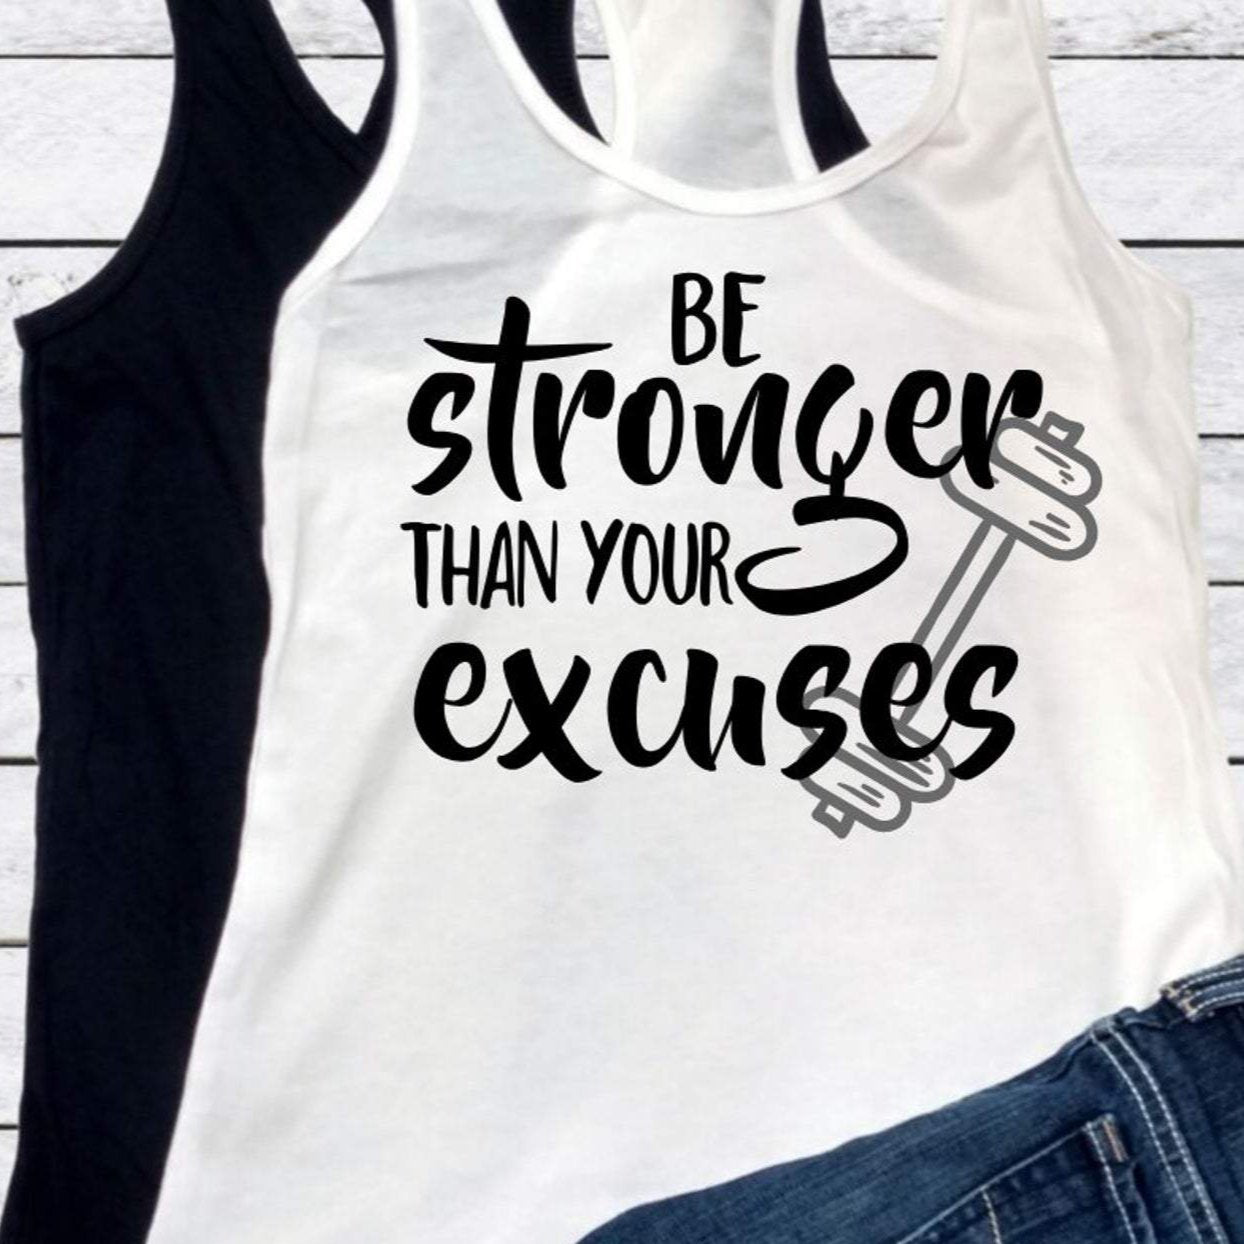 Cute Gym Clothes, Gym Shirts With Funny Sayings, Shirts For Women That Lift  Weights, Crop Top For The Gym, Cute Workout Crop Top, Fitness